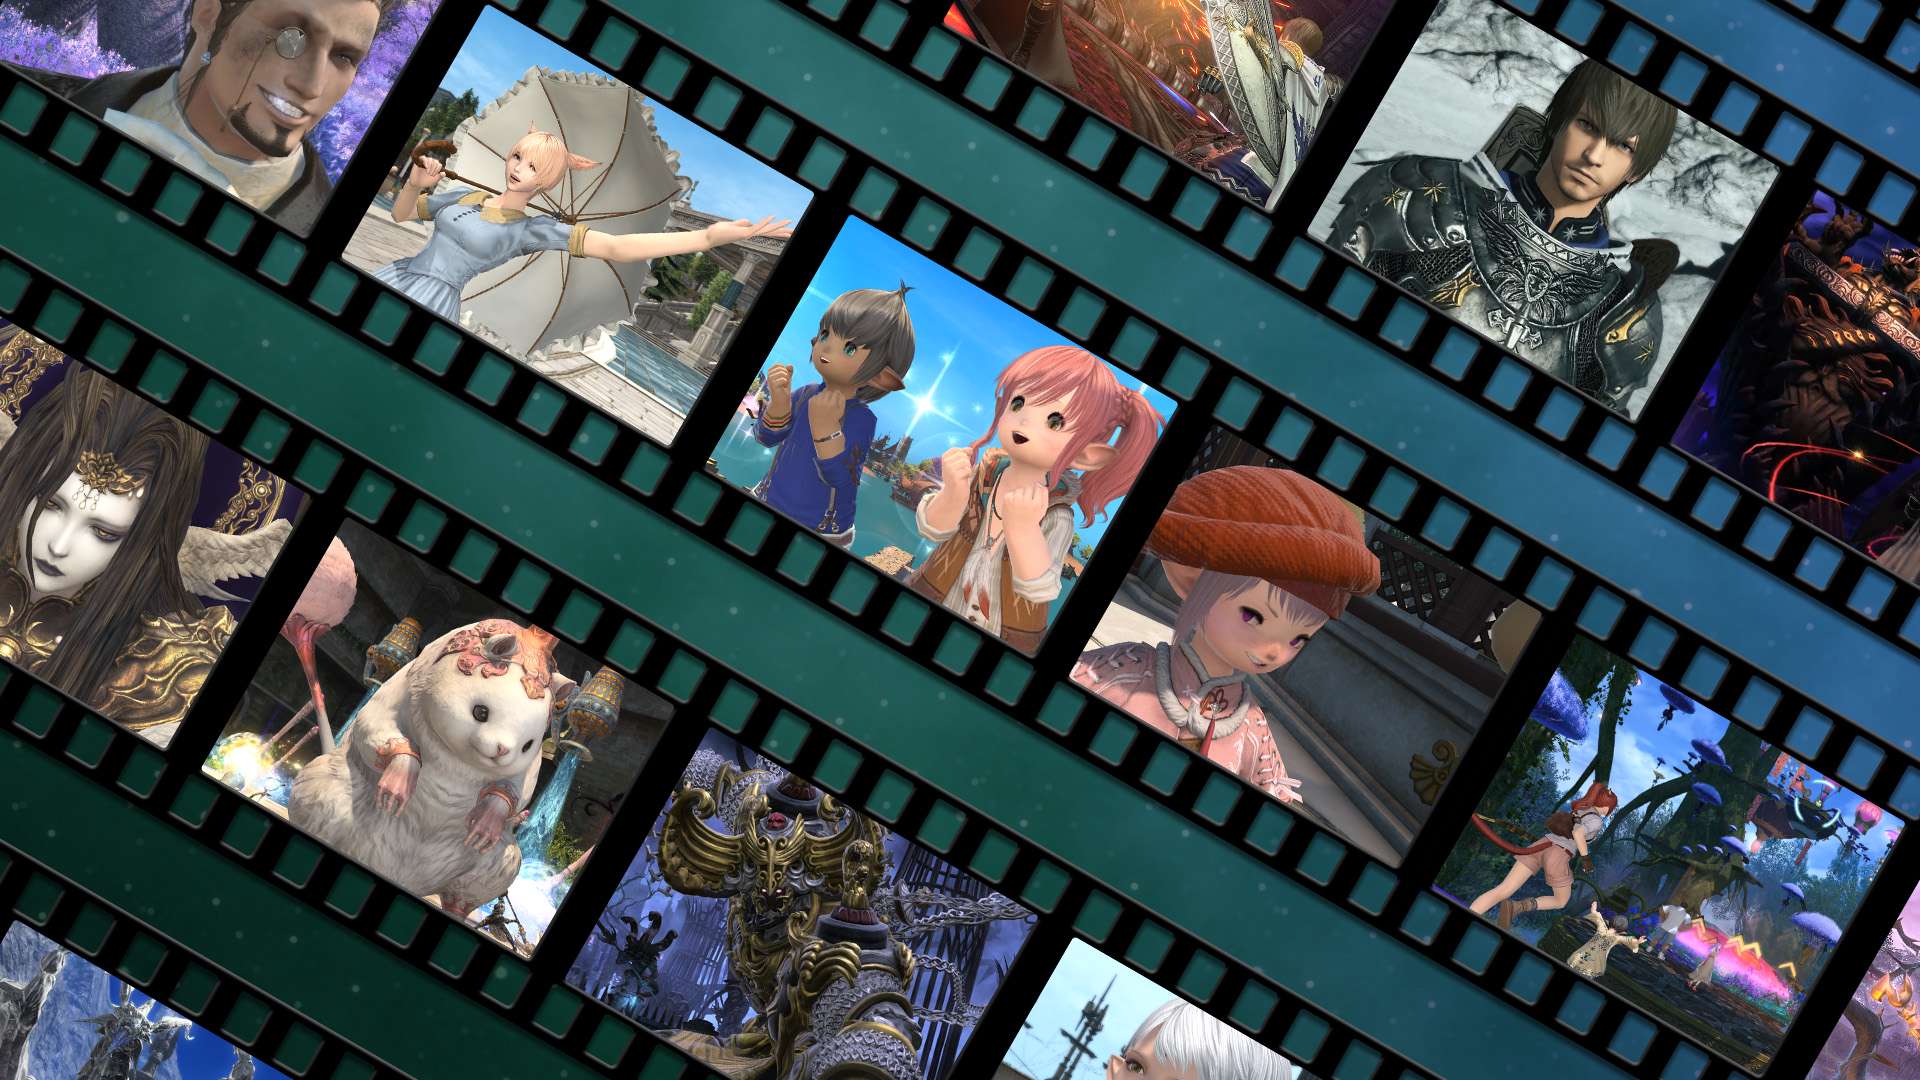 Multiple video reels featuring various in-game screenshots from FINAL FANTASY 14 spread across the image against a starry background of blue and green. 